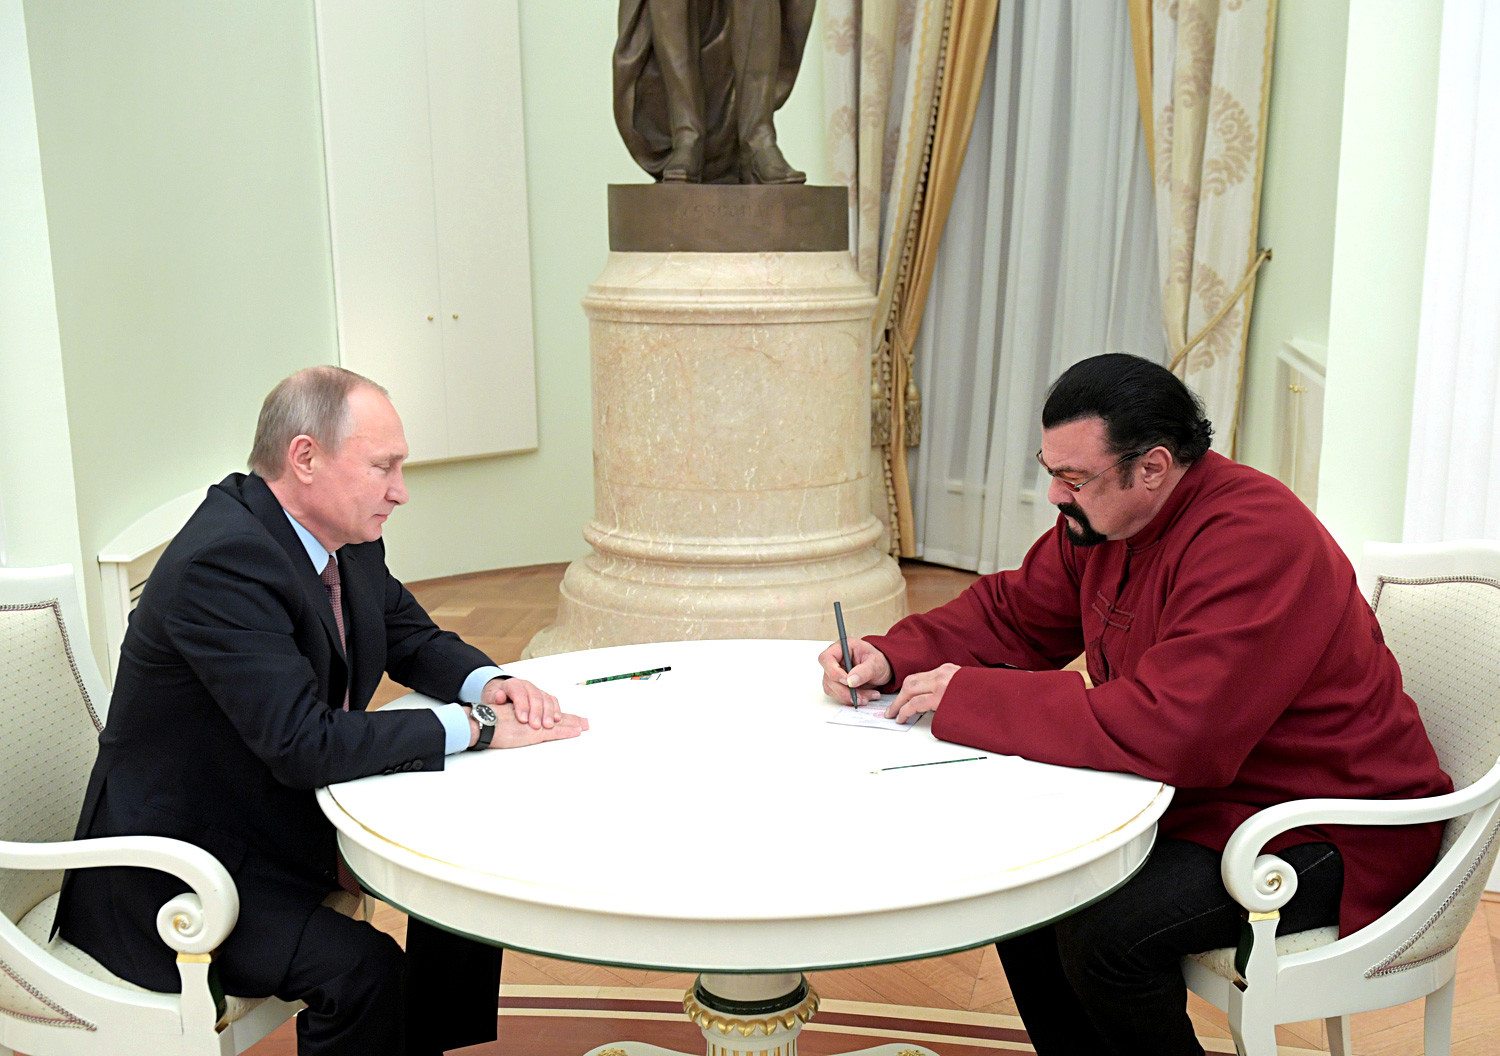 Steven Seagal signs a Russian passport received from Russia's President Vladimir Putin during a meeting at the Kremlin in Moscow, November 25, 2016